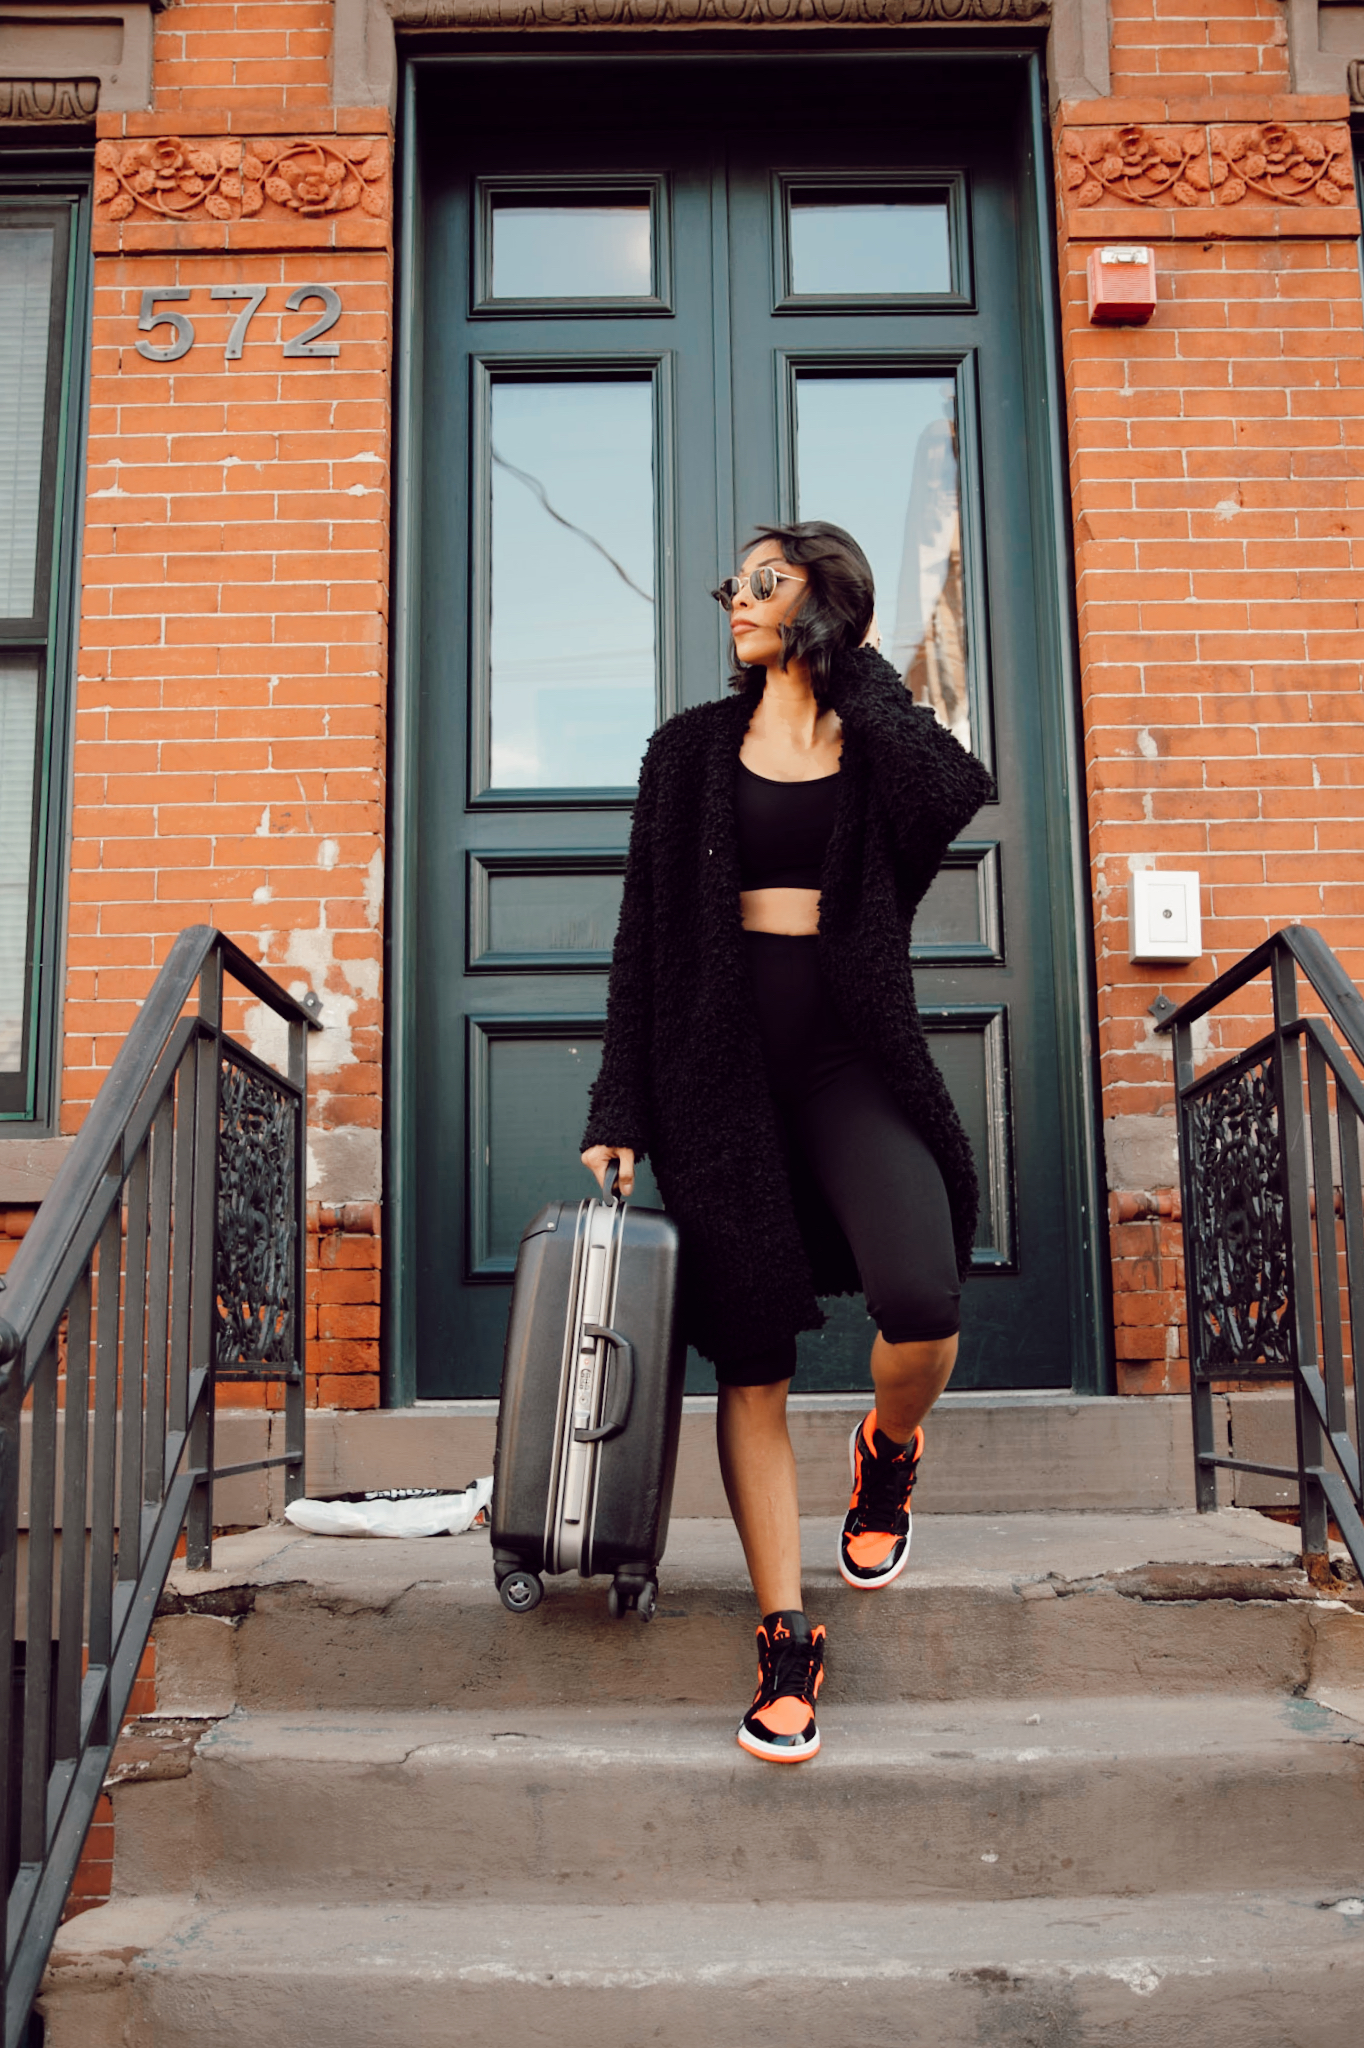 AIRPORT & TRAVEL OUTFIT IDEAS 2020 